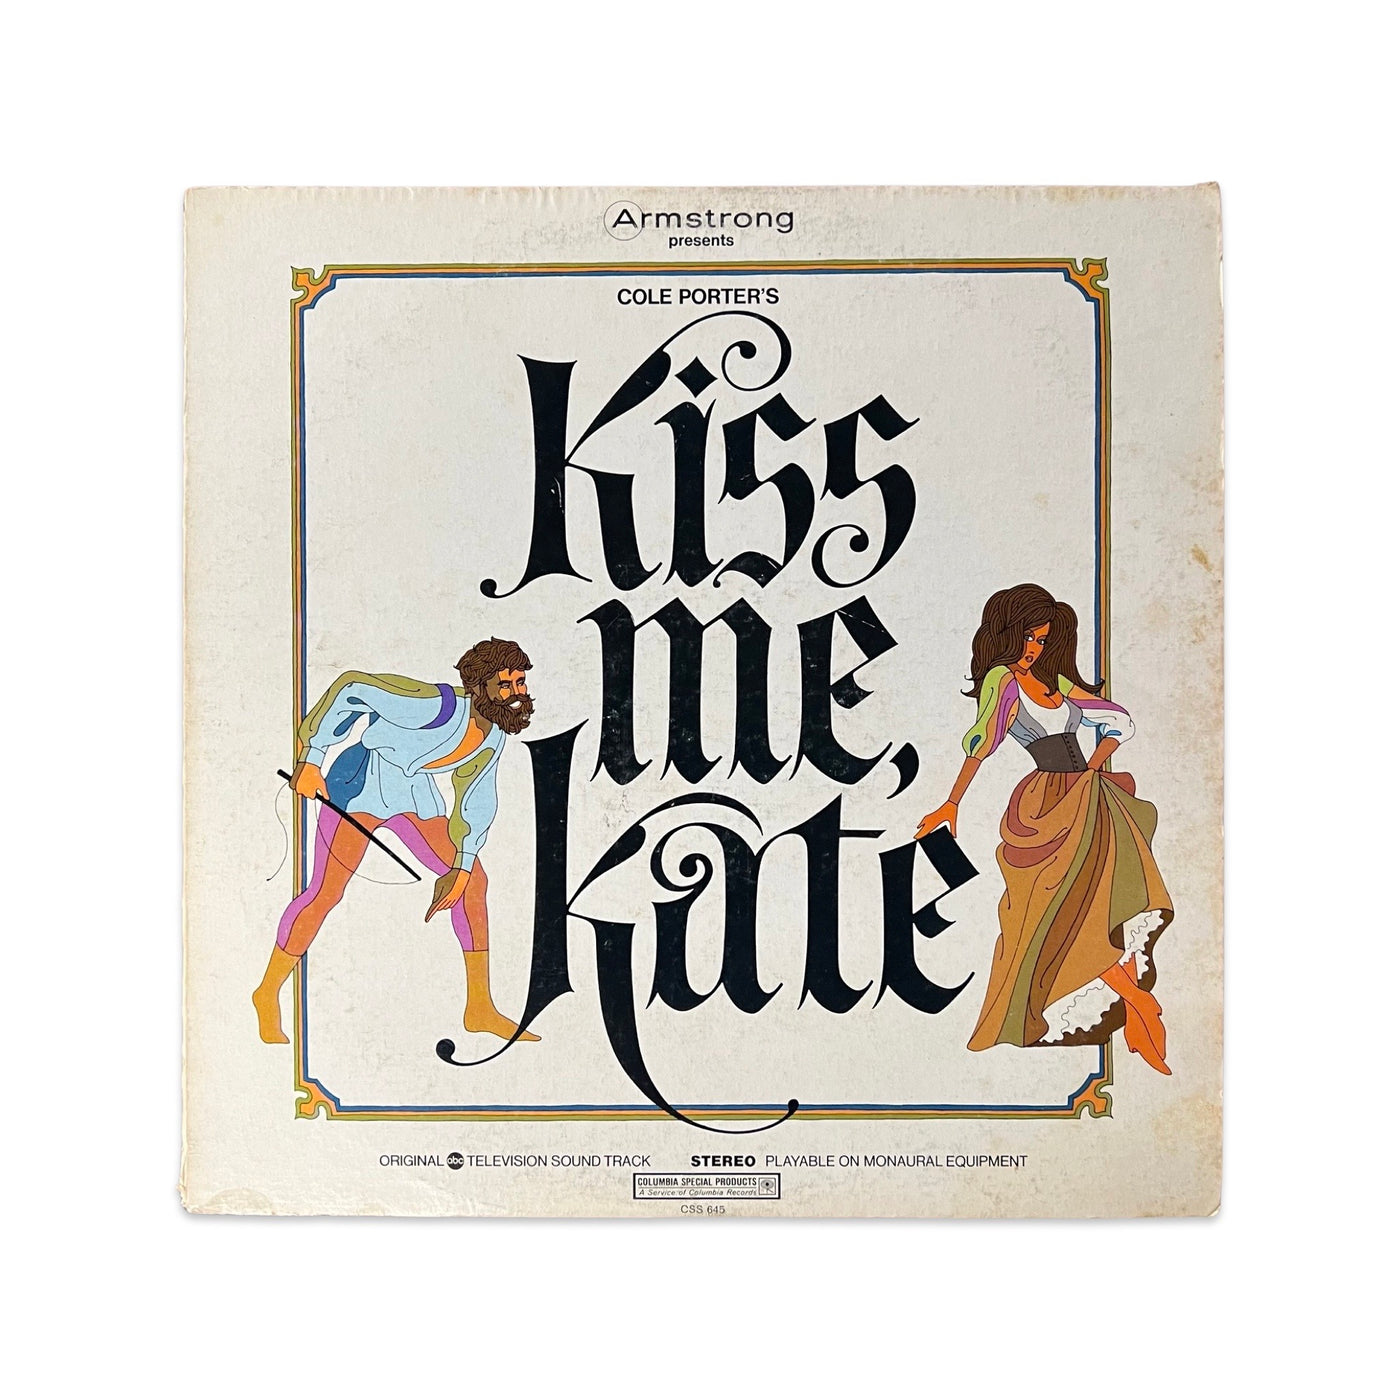 Various - Armstrong Presents Cole Porter's Kiss Me, Kate - Original ABC Television Sound Track